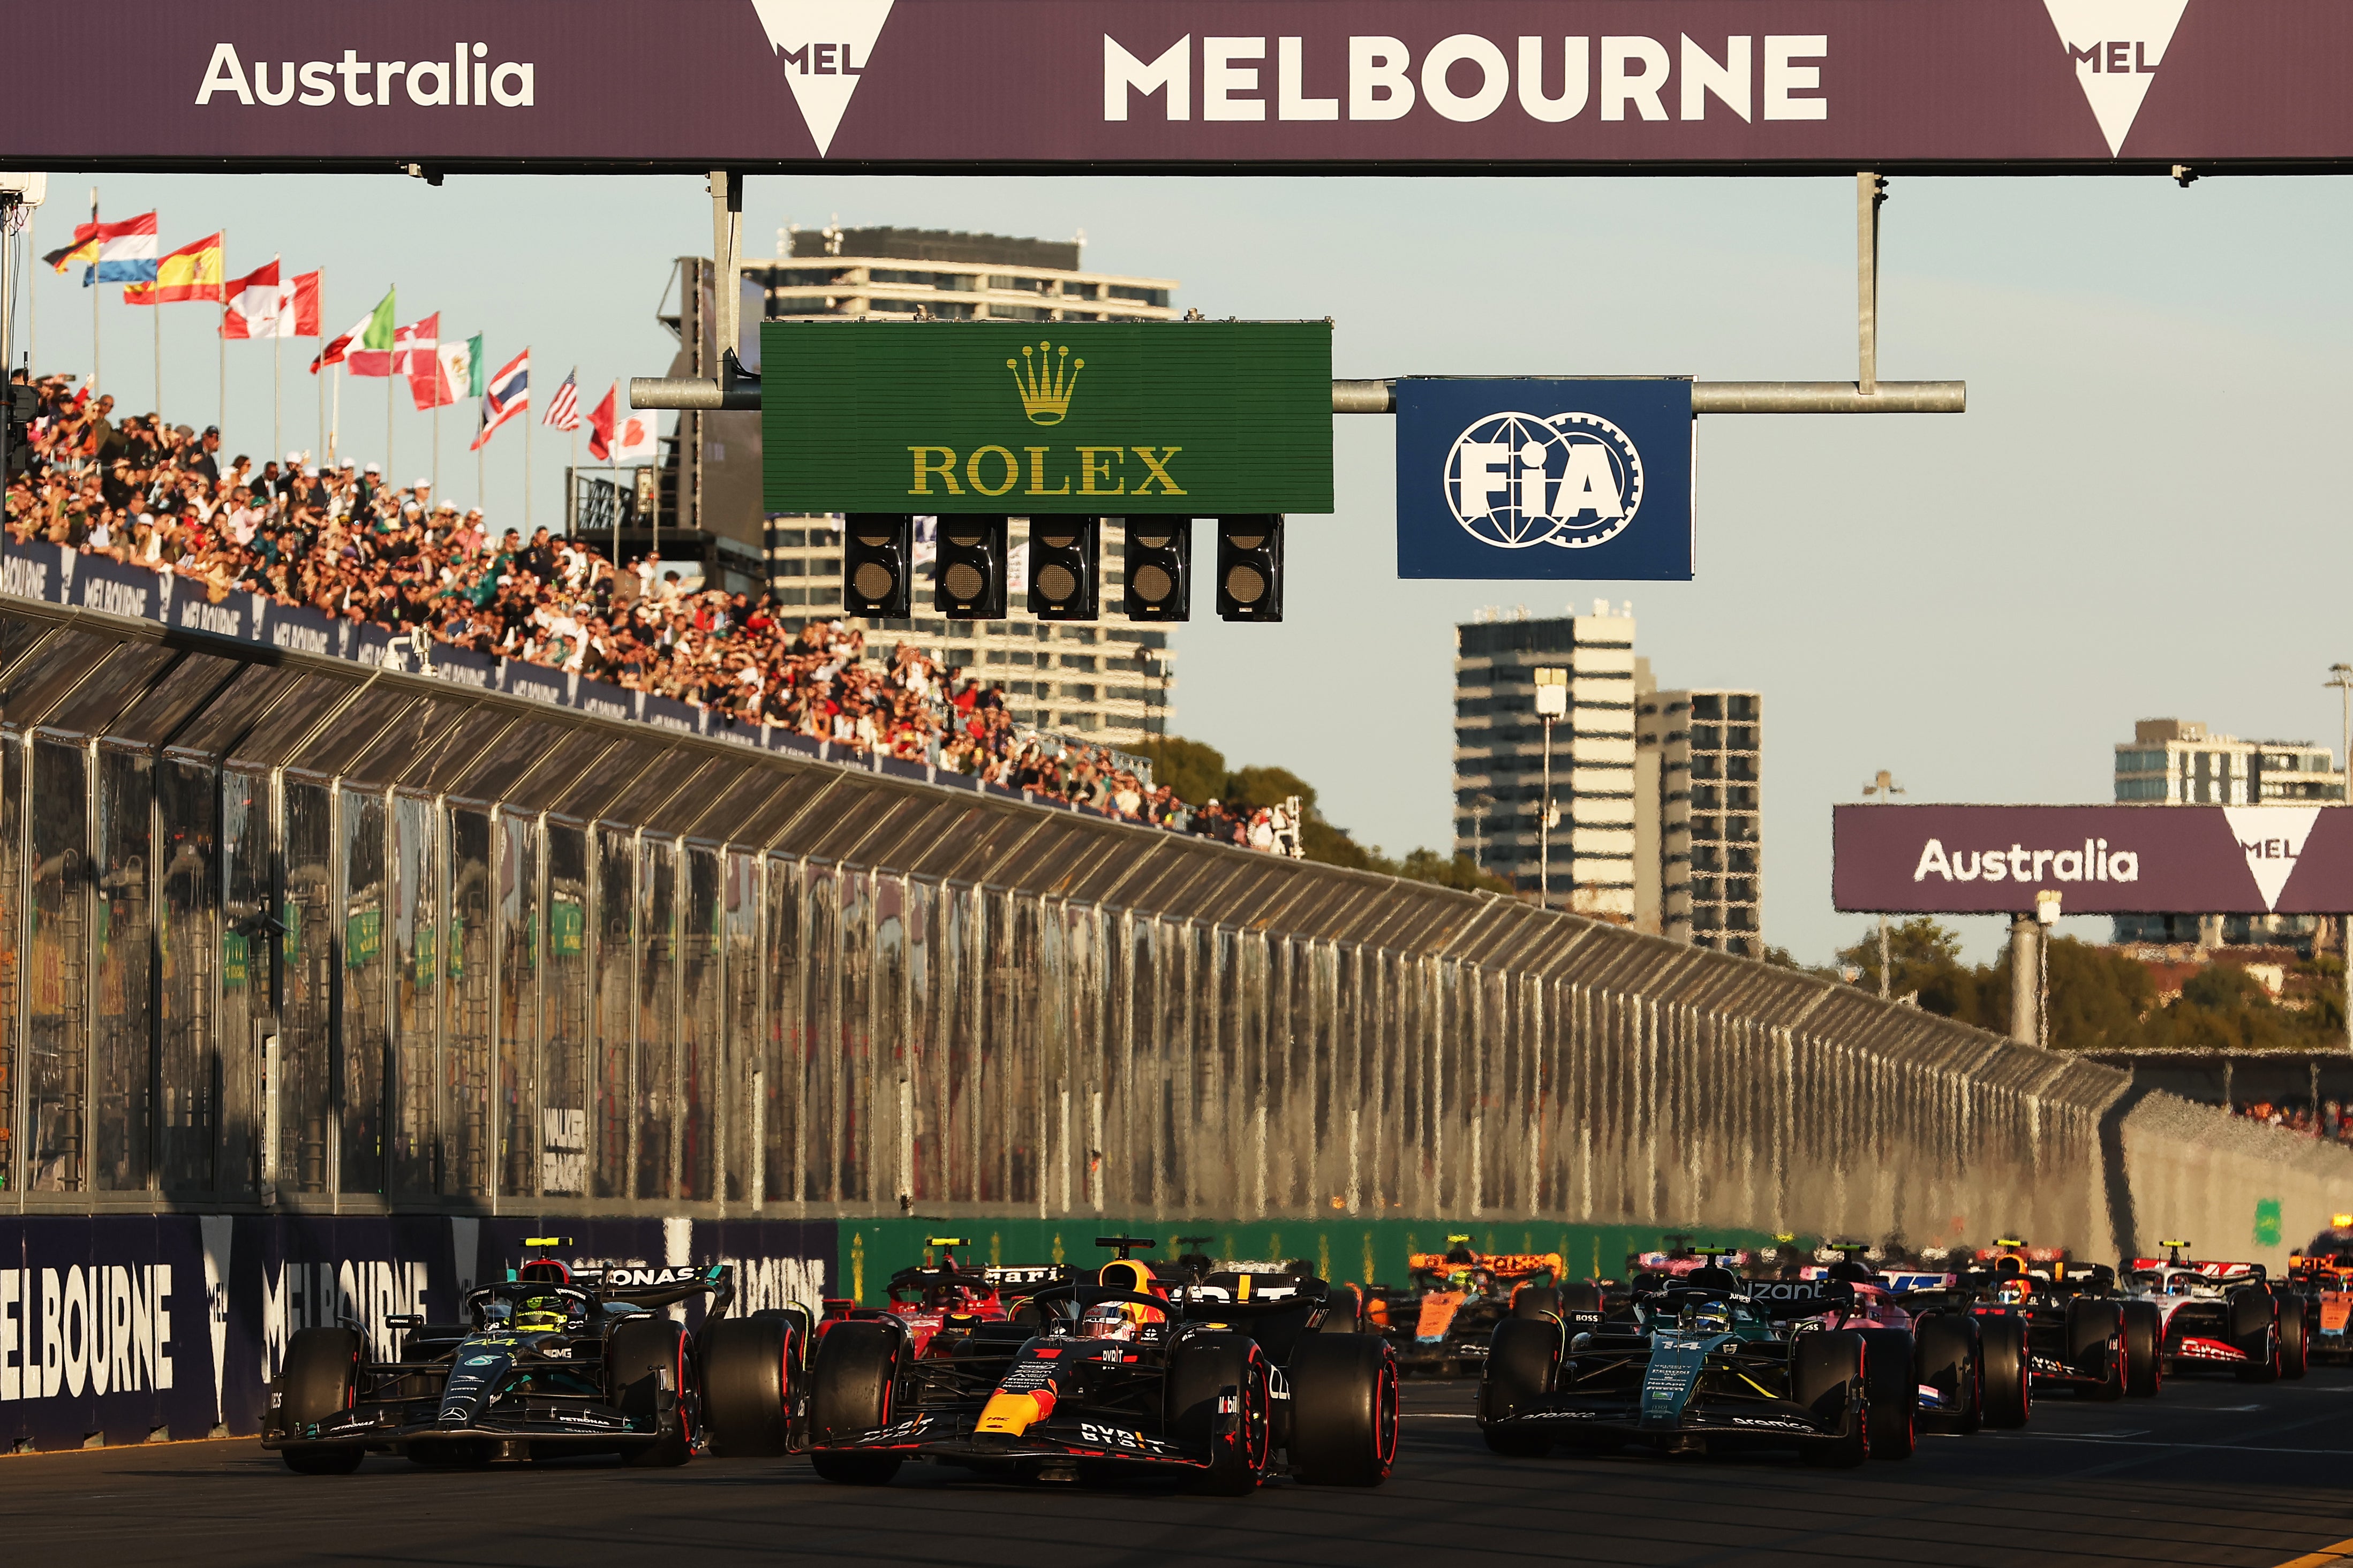 The Australian Grand Prix saw three red flags thrown as chaos ensued at the end in Melbourne